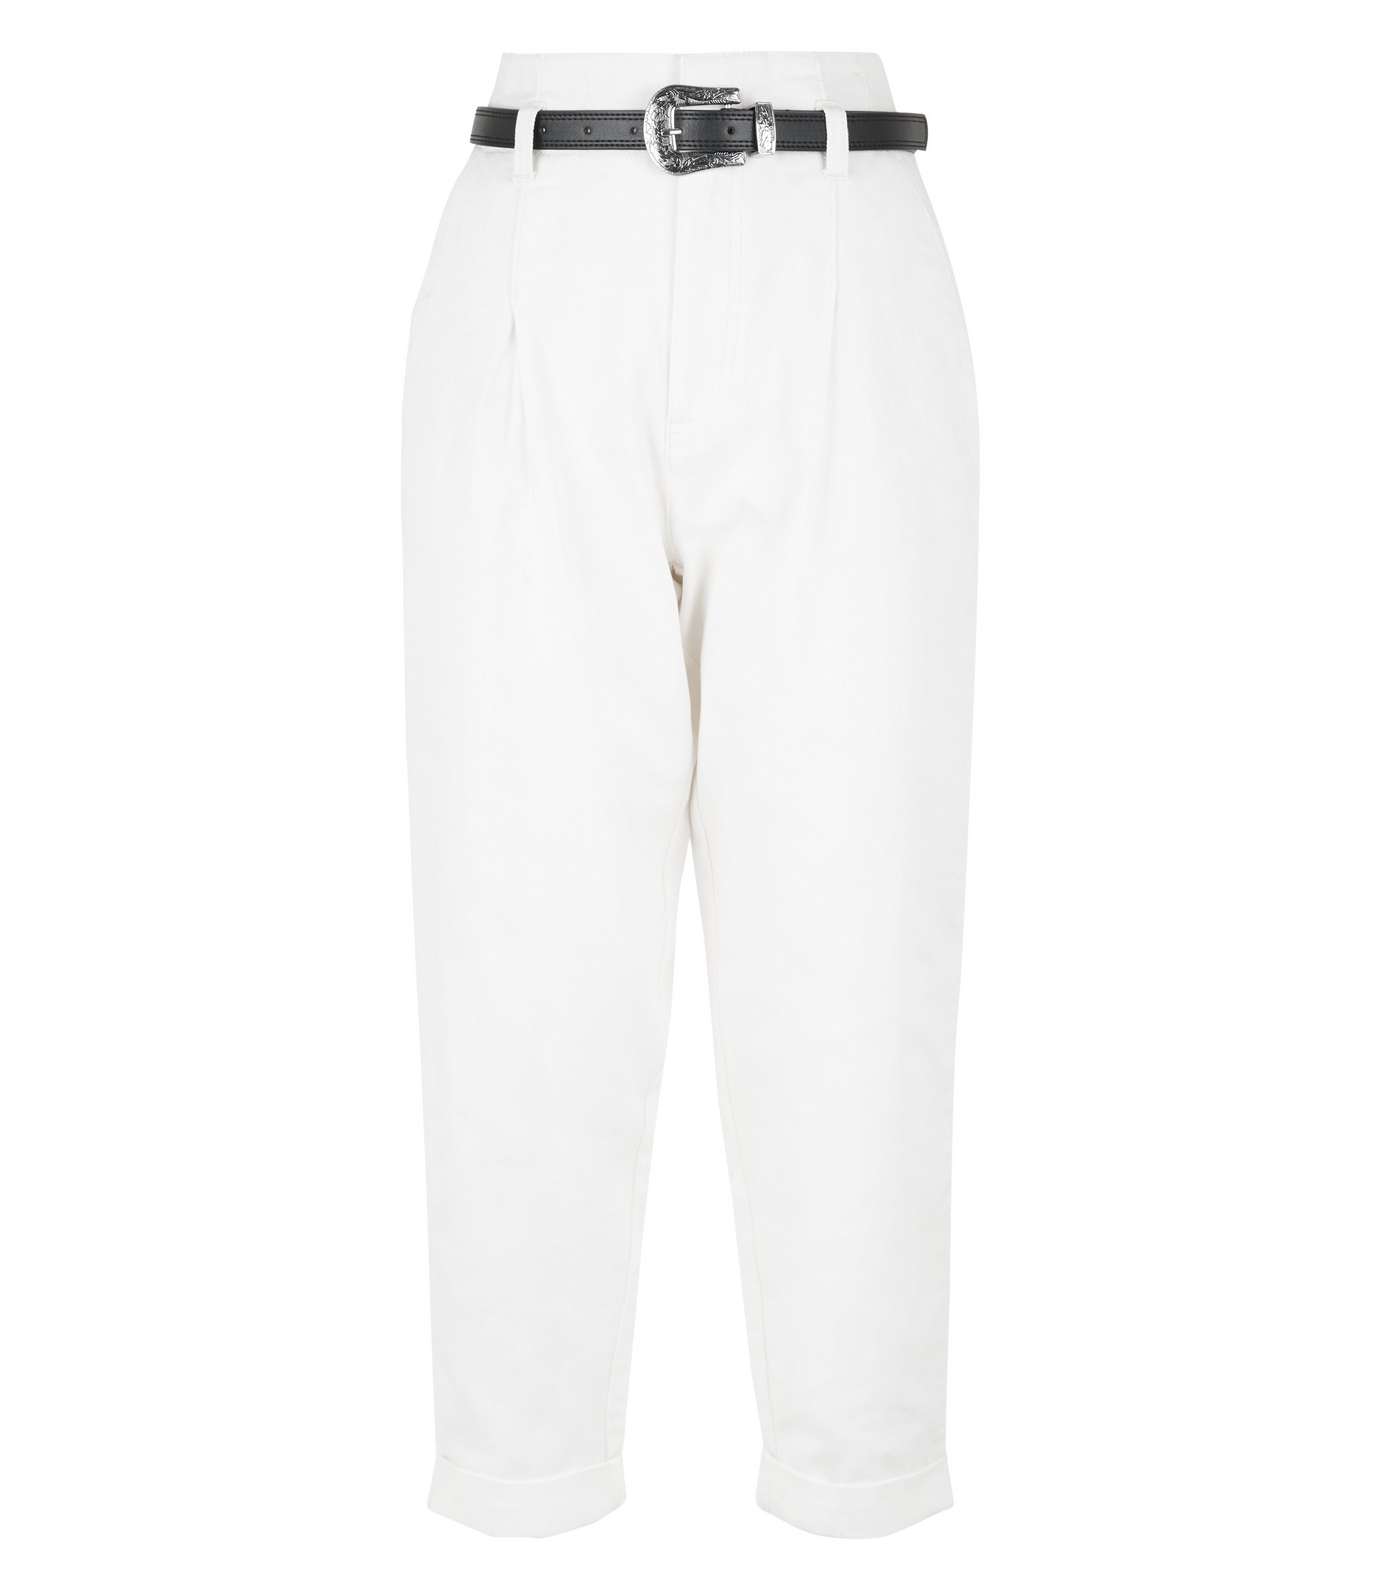 Off White High Waist Belted Jeans Image 5